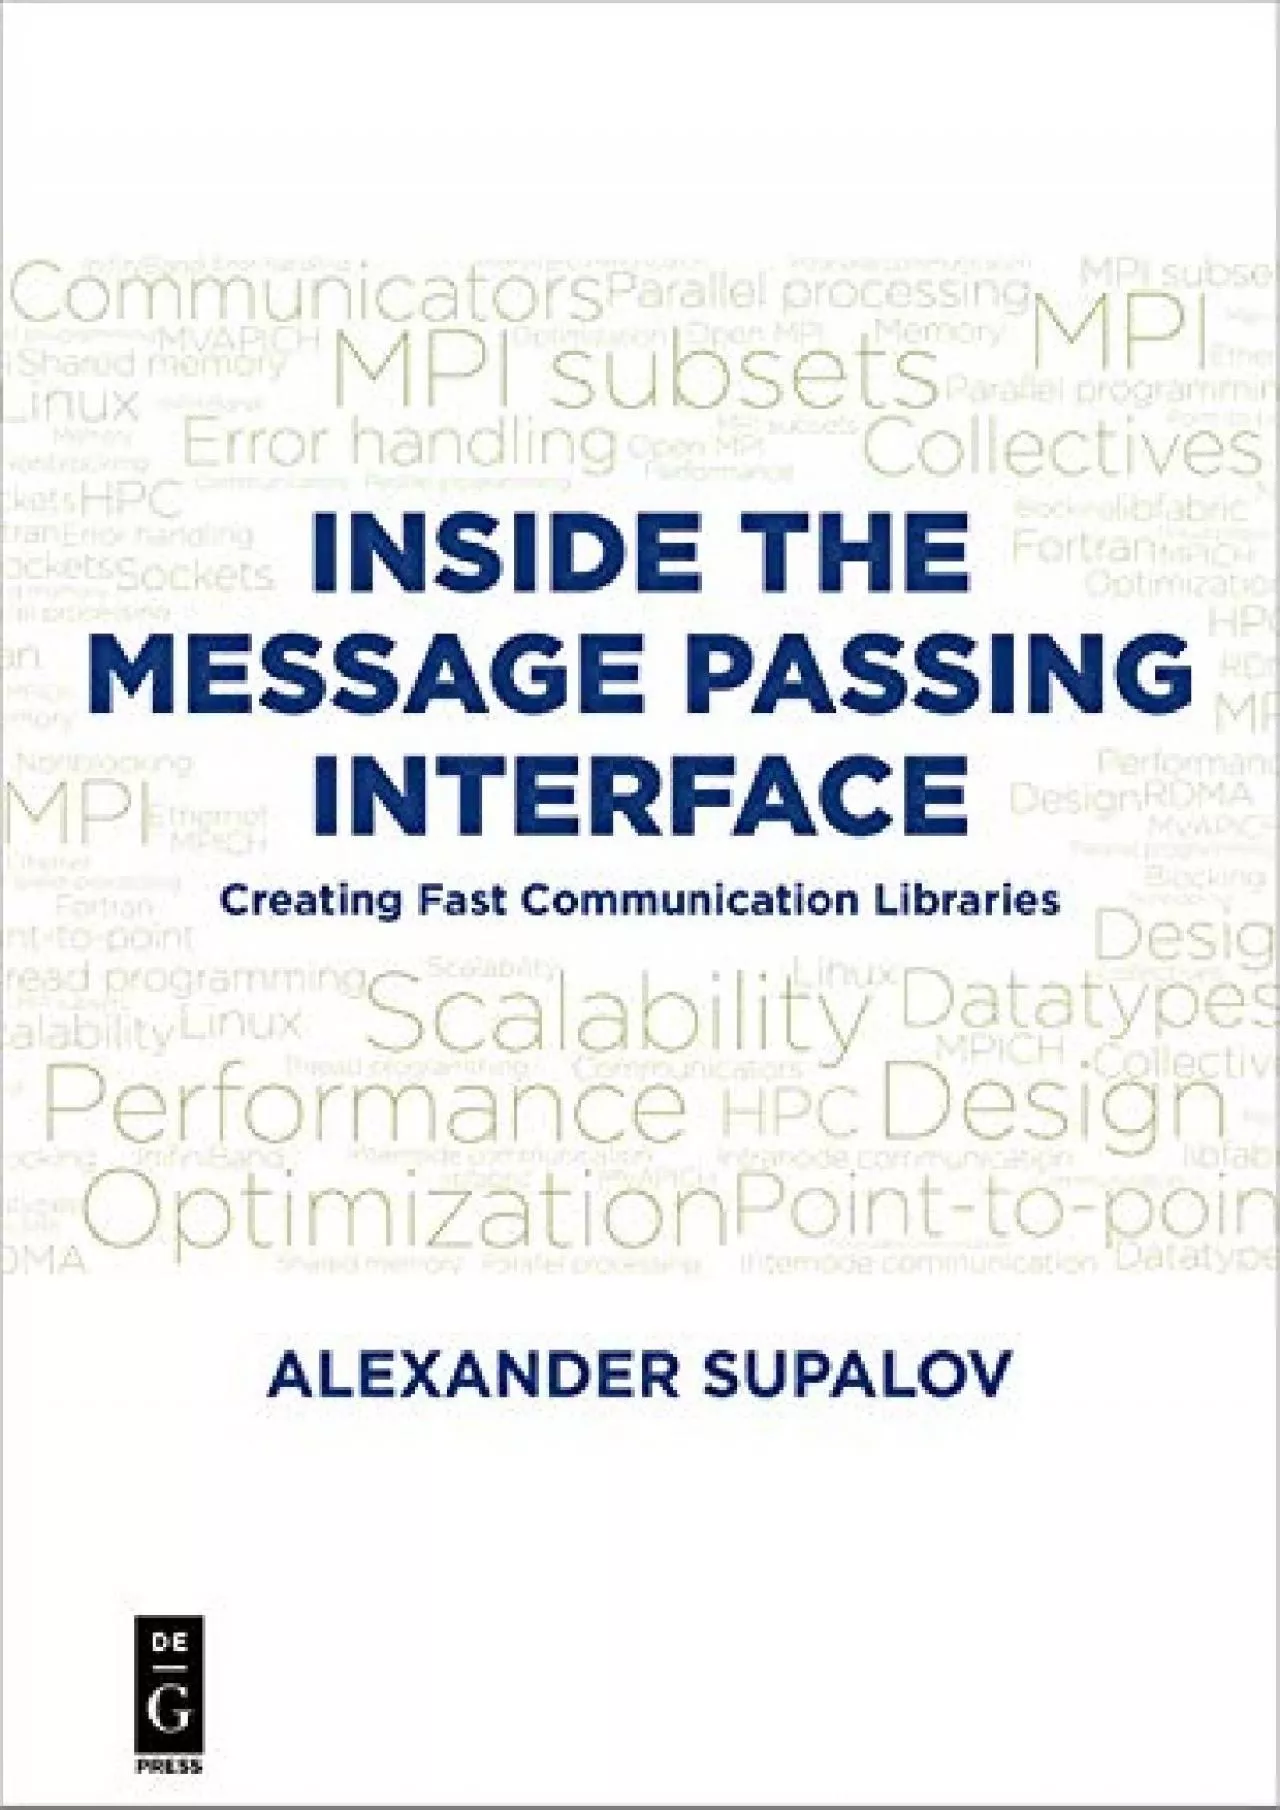 (EBOOK)-Inside the Message Passing Interface Creating Fast Communication Libraries